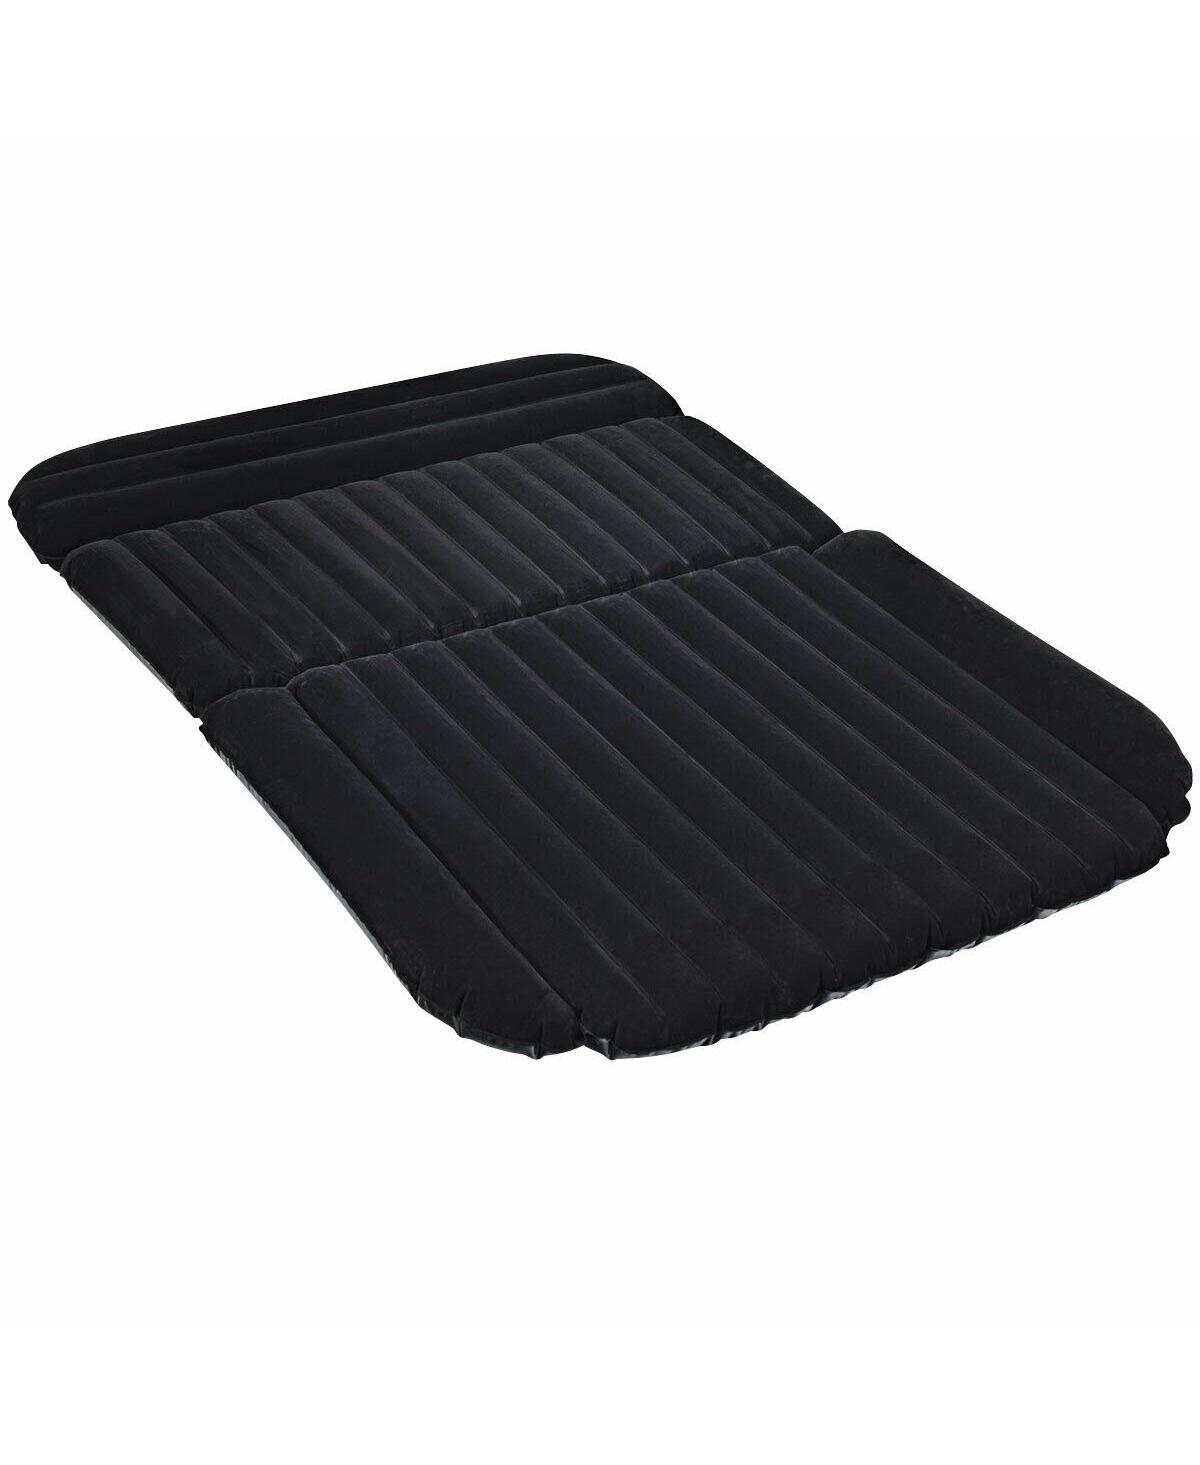 Inflatable Suv Air Backseat Mattress Travel Pad with Pump Outdoor - Black